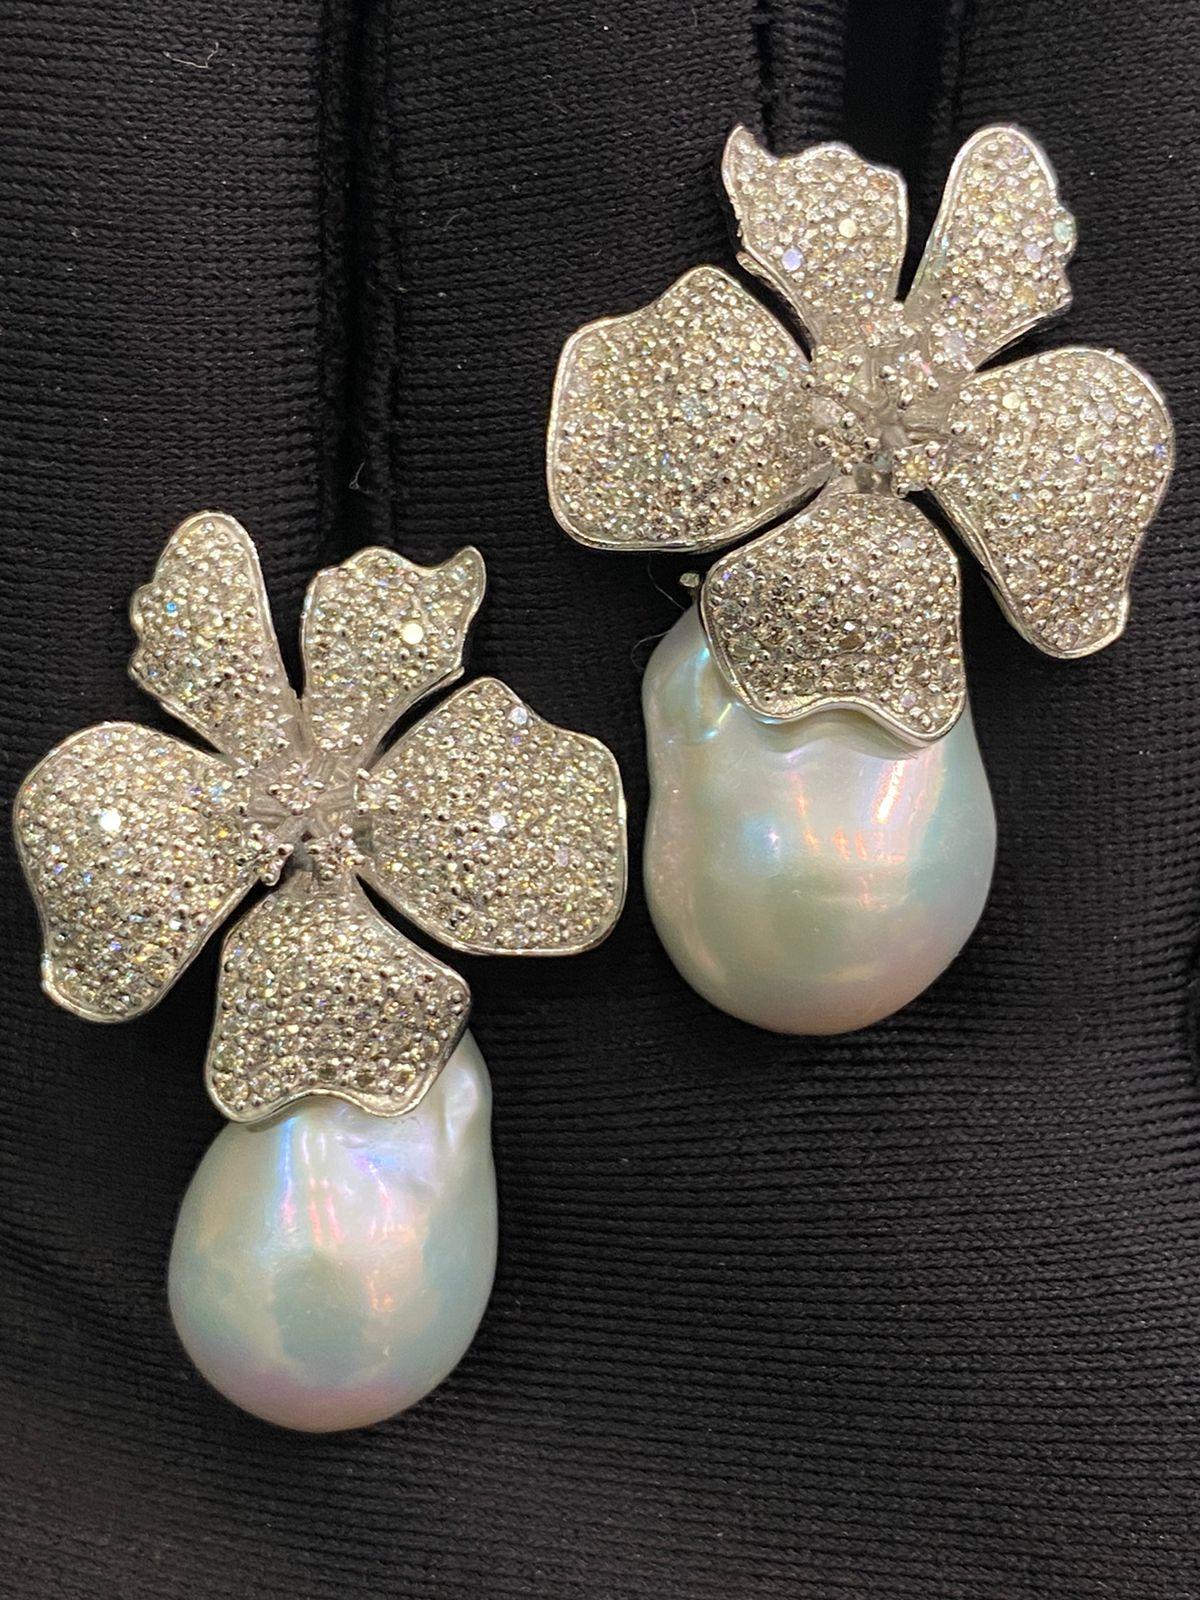 So chic and original  flowers design in 18k gold , with  3.82 Carats Diamonds G/SI1 , and 51 Carats Natural Mother Of Pearls.
Handmade by artisan goldsmith.
Excellent manufacture.